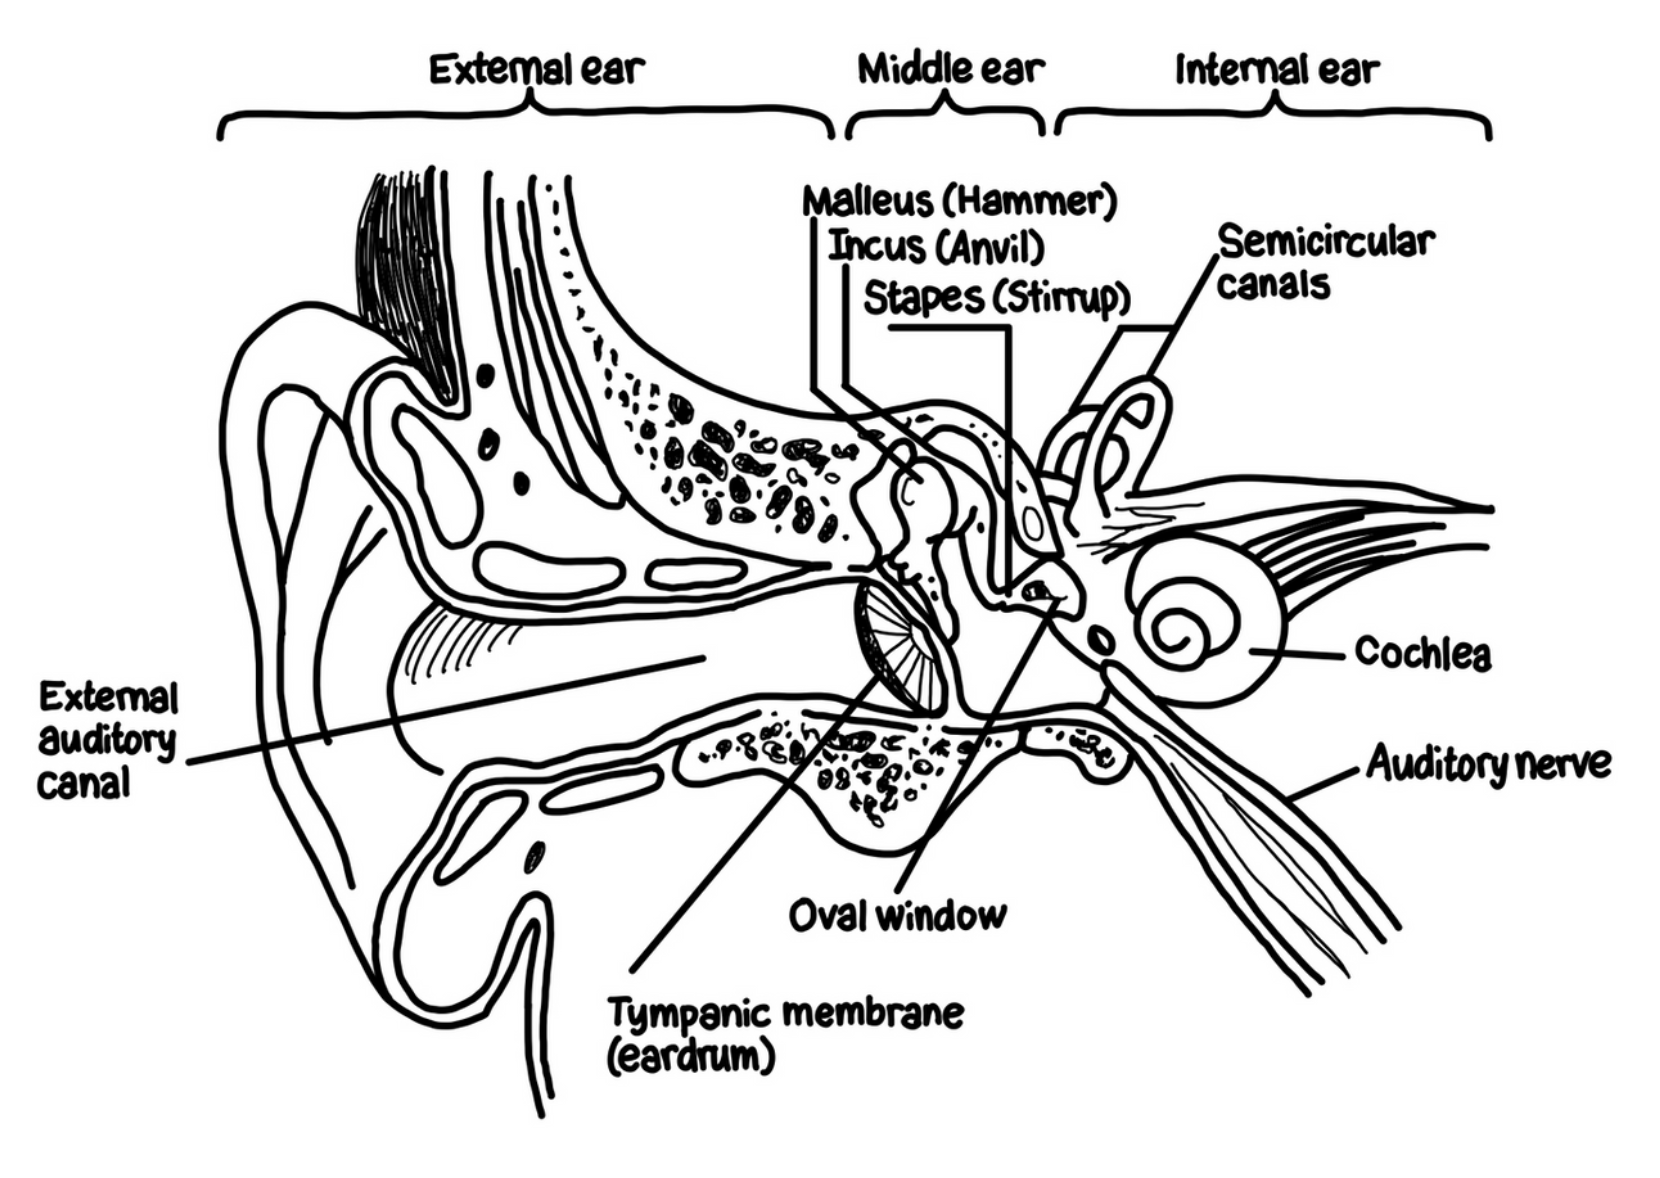 <ul><li><p>Sound waves are collected in your outer ear (pinna) and travel down the ear canal until they reach the eardrum (tympanic membrane).</p></li><li><p>The membrane vibrates as the sound waves hit it and is attached to the first in a series of 3 small bones (collectively known as the <strong>ossicles</strong>)</p></li><li><p>Eardrum connects with the <strong>hammer</strong> (malleus), which connects to the <strong>anvil</strong> (incus), which connects to the <strong>stirrup</strong> (stapes)</p></li><li><p>The vibration of the eardrum is transmitted by these 3 bones to the <strong>oval window</strong> which is attached the to cochlea, a structure shaped like a snail’s shell filled with fluid. As the oval window vibrates, the fluid moves.</p></li><li><p>The floor of the cochlea is called the basilar membrane. It’s lined with hair cells connected to the <strong>organ of Corti</strong>, which are neurons activated by the movement of the hair cells. When the fluid moves, the hair cells move and transduction occurs. The organ of Corti fires, and these impulses are transmitted to the brain via the auditory nerve.</p></li></ul>